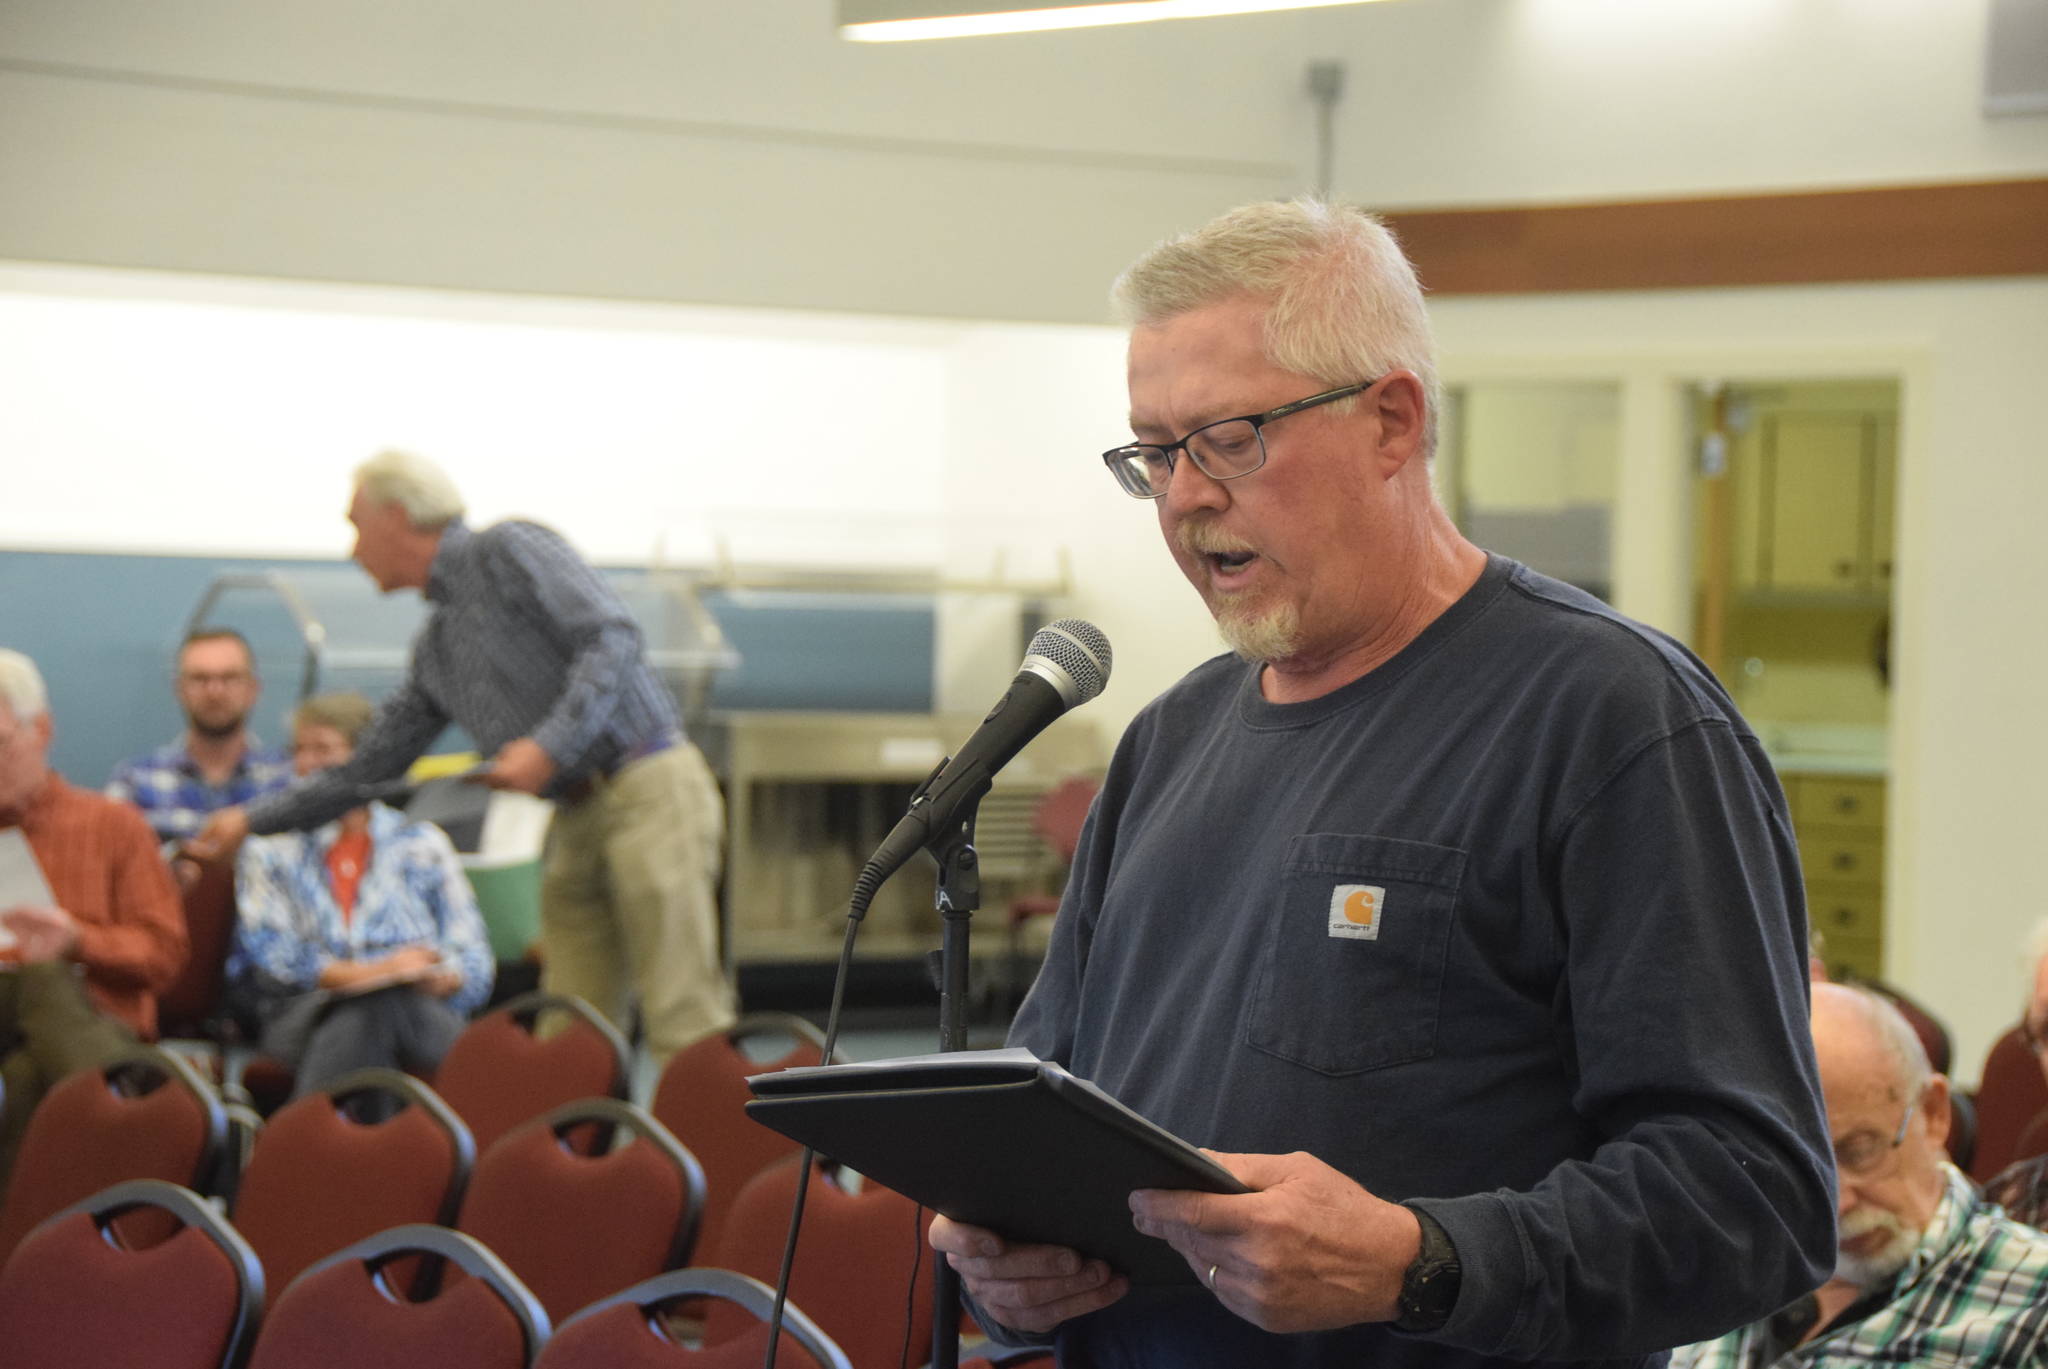 Nikiski resident Bill Bookout speaks to members of the Federal Energy Regulatory Commission regarding the Draft Environmental Impact Statement for the Alaska LNG Project at the Nikiski Community Recreation Center on Sept. 11, 2019. (Photo by Brian Mazurek/Peninsula Clarion)